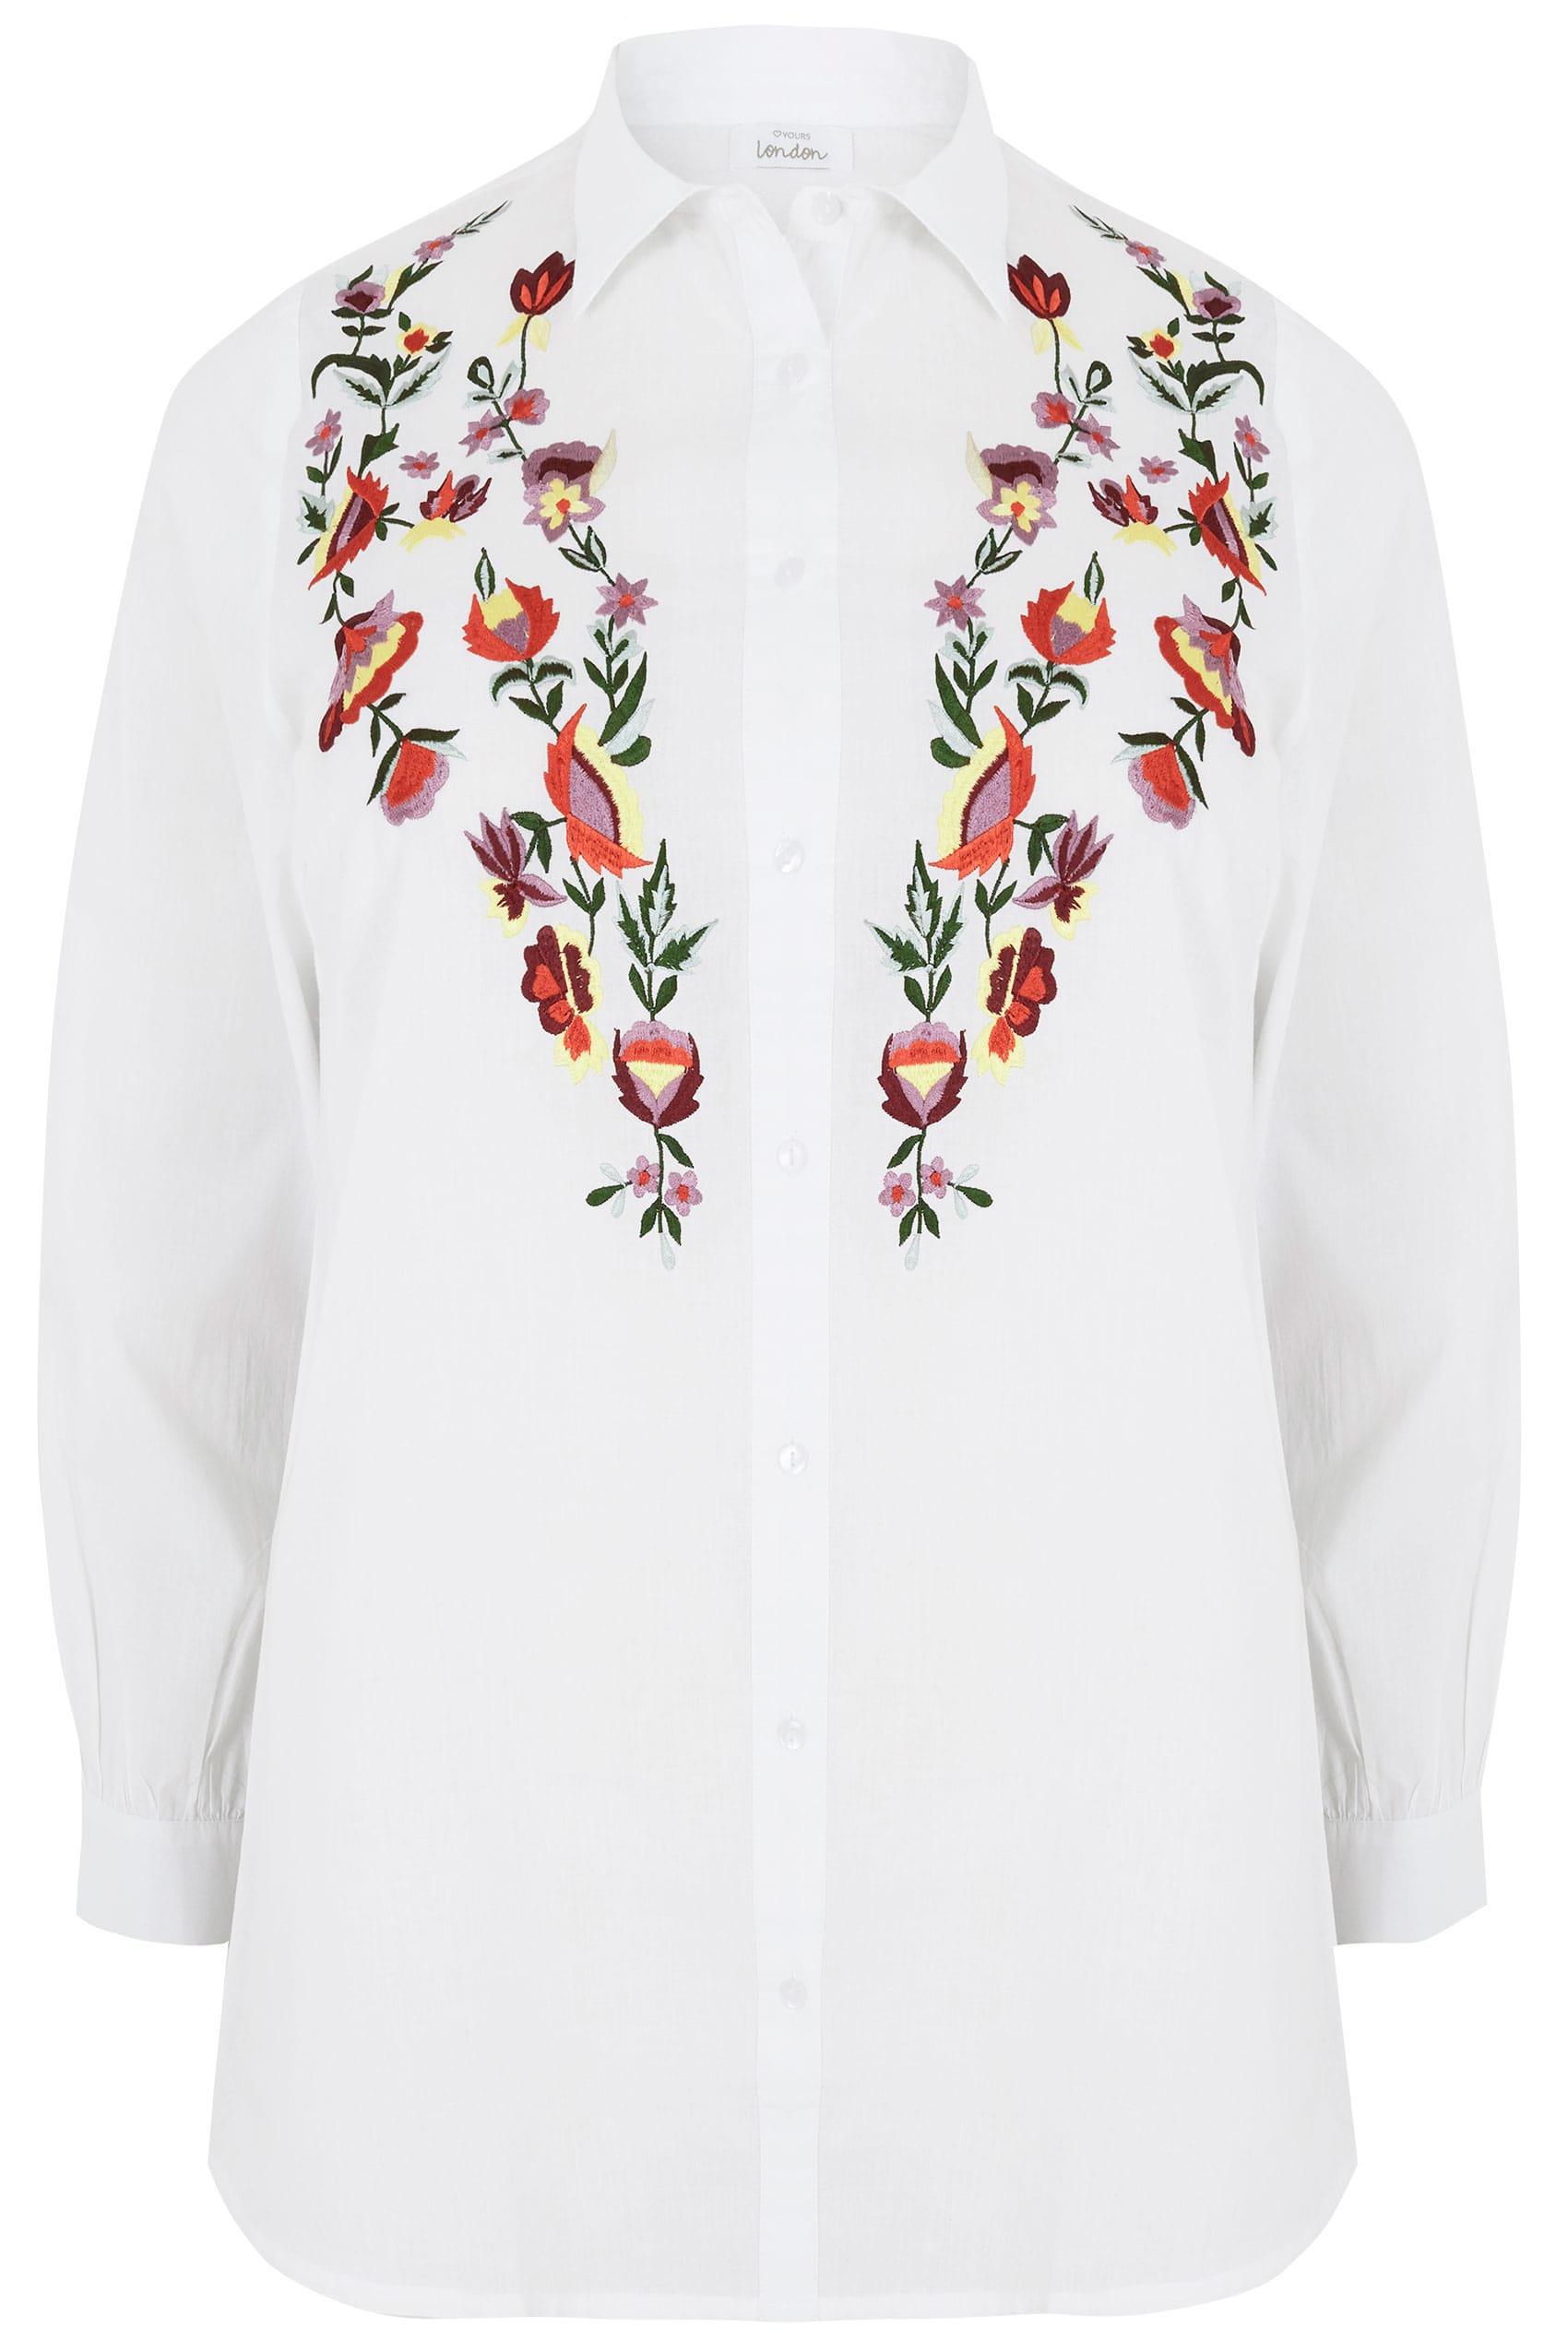 YOURS LONDON White Floral Embroidered Shirt, plus size 16 to 36